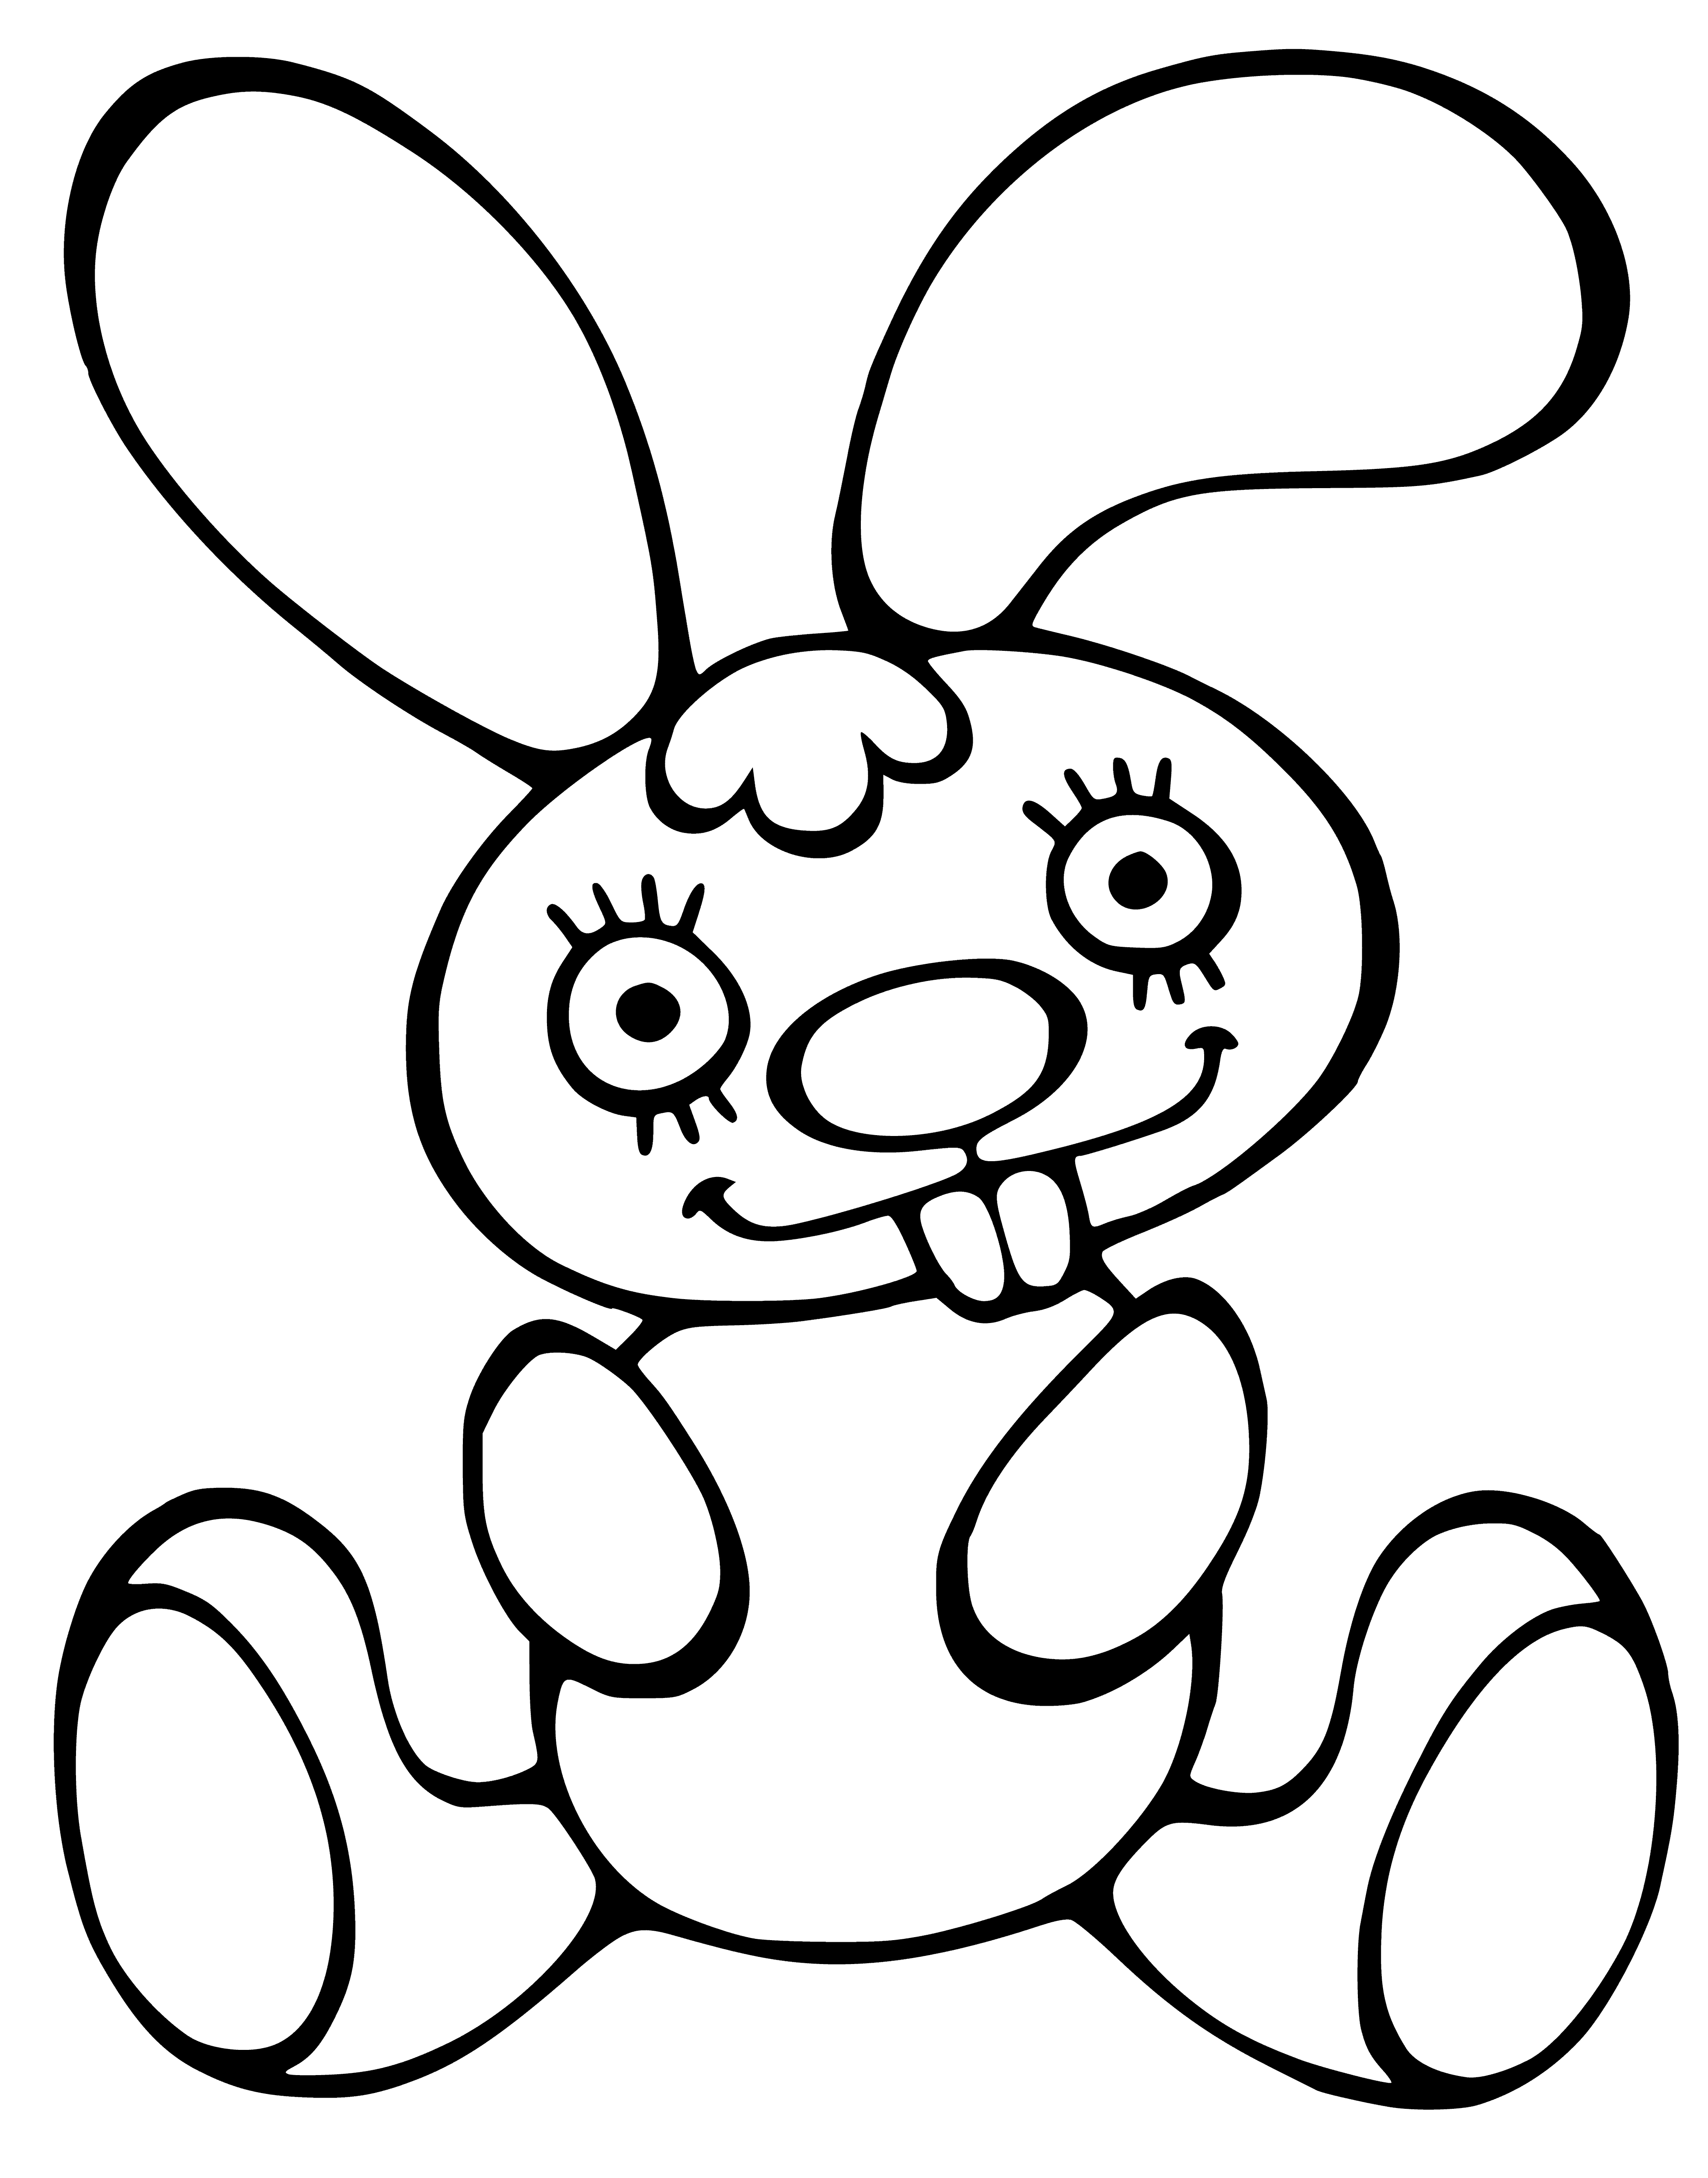 coloring page: A brown & white bunny stands on its hind legs, with paws in the air & a brown nose & eyes. #ColoringPage